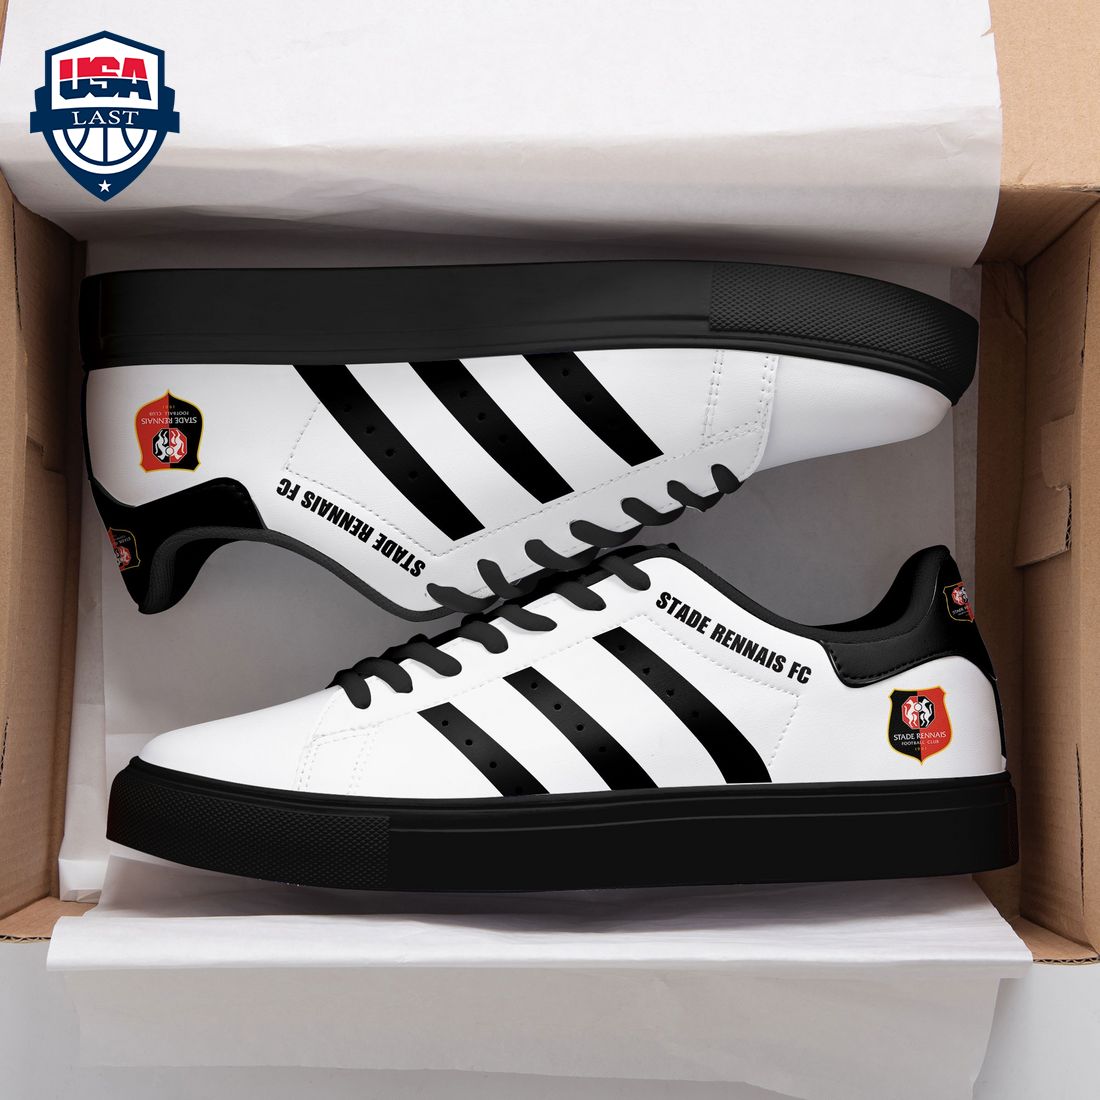 Stade Rennais FC Black Stripes Stan Smith Low Top Shoes - Best picture ever